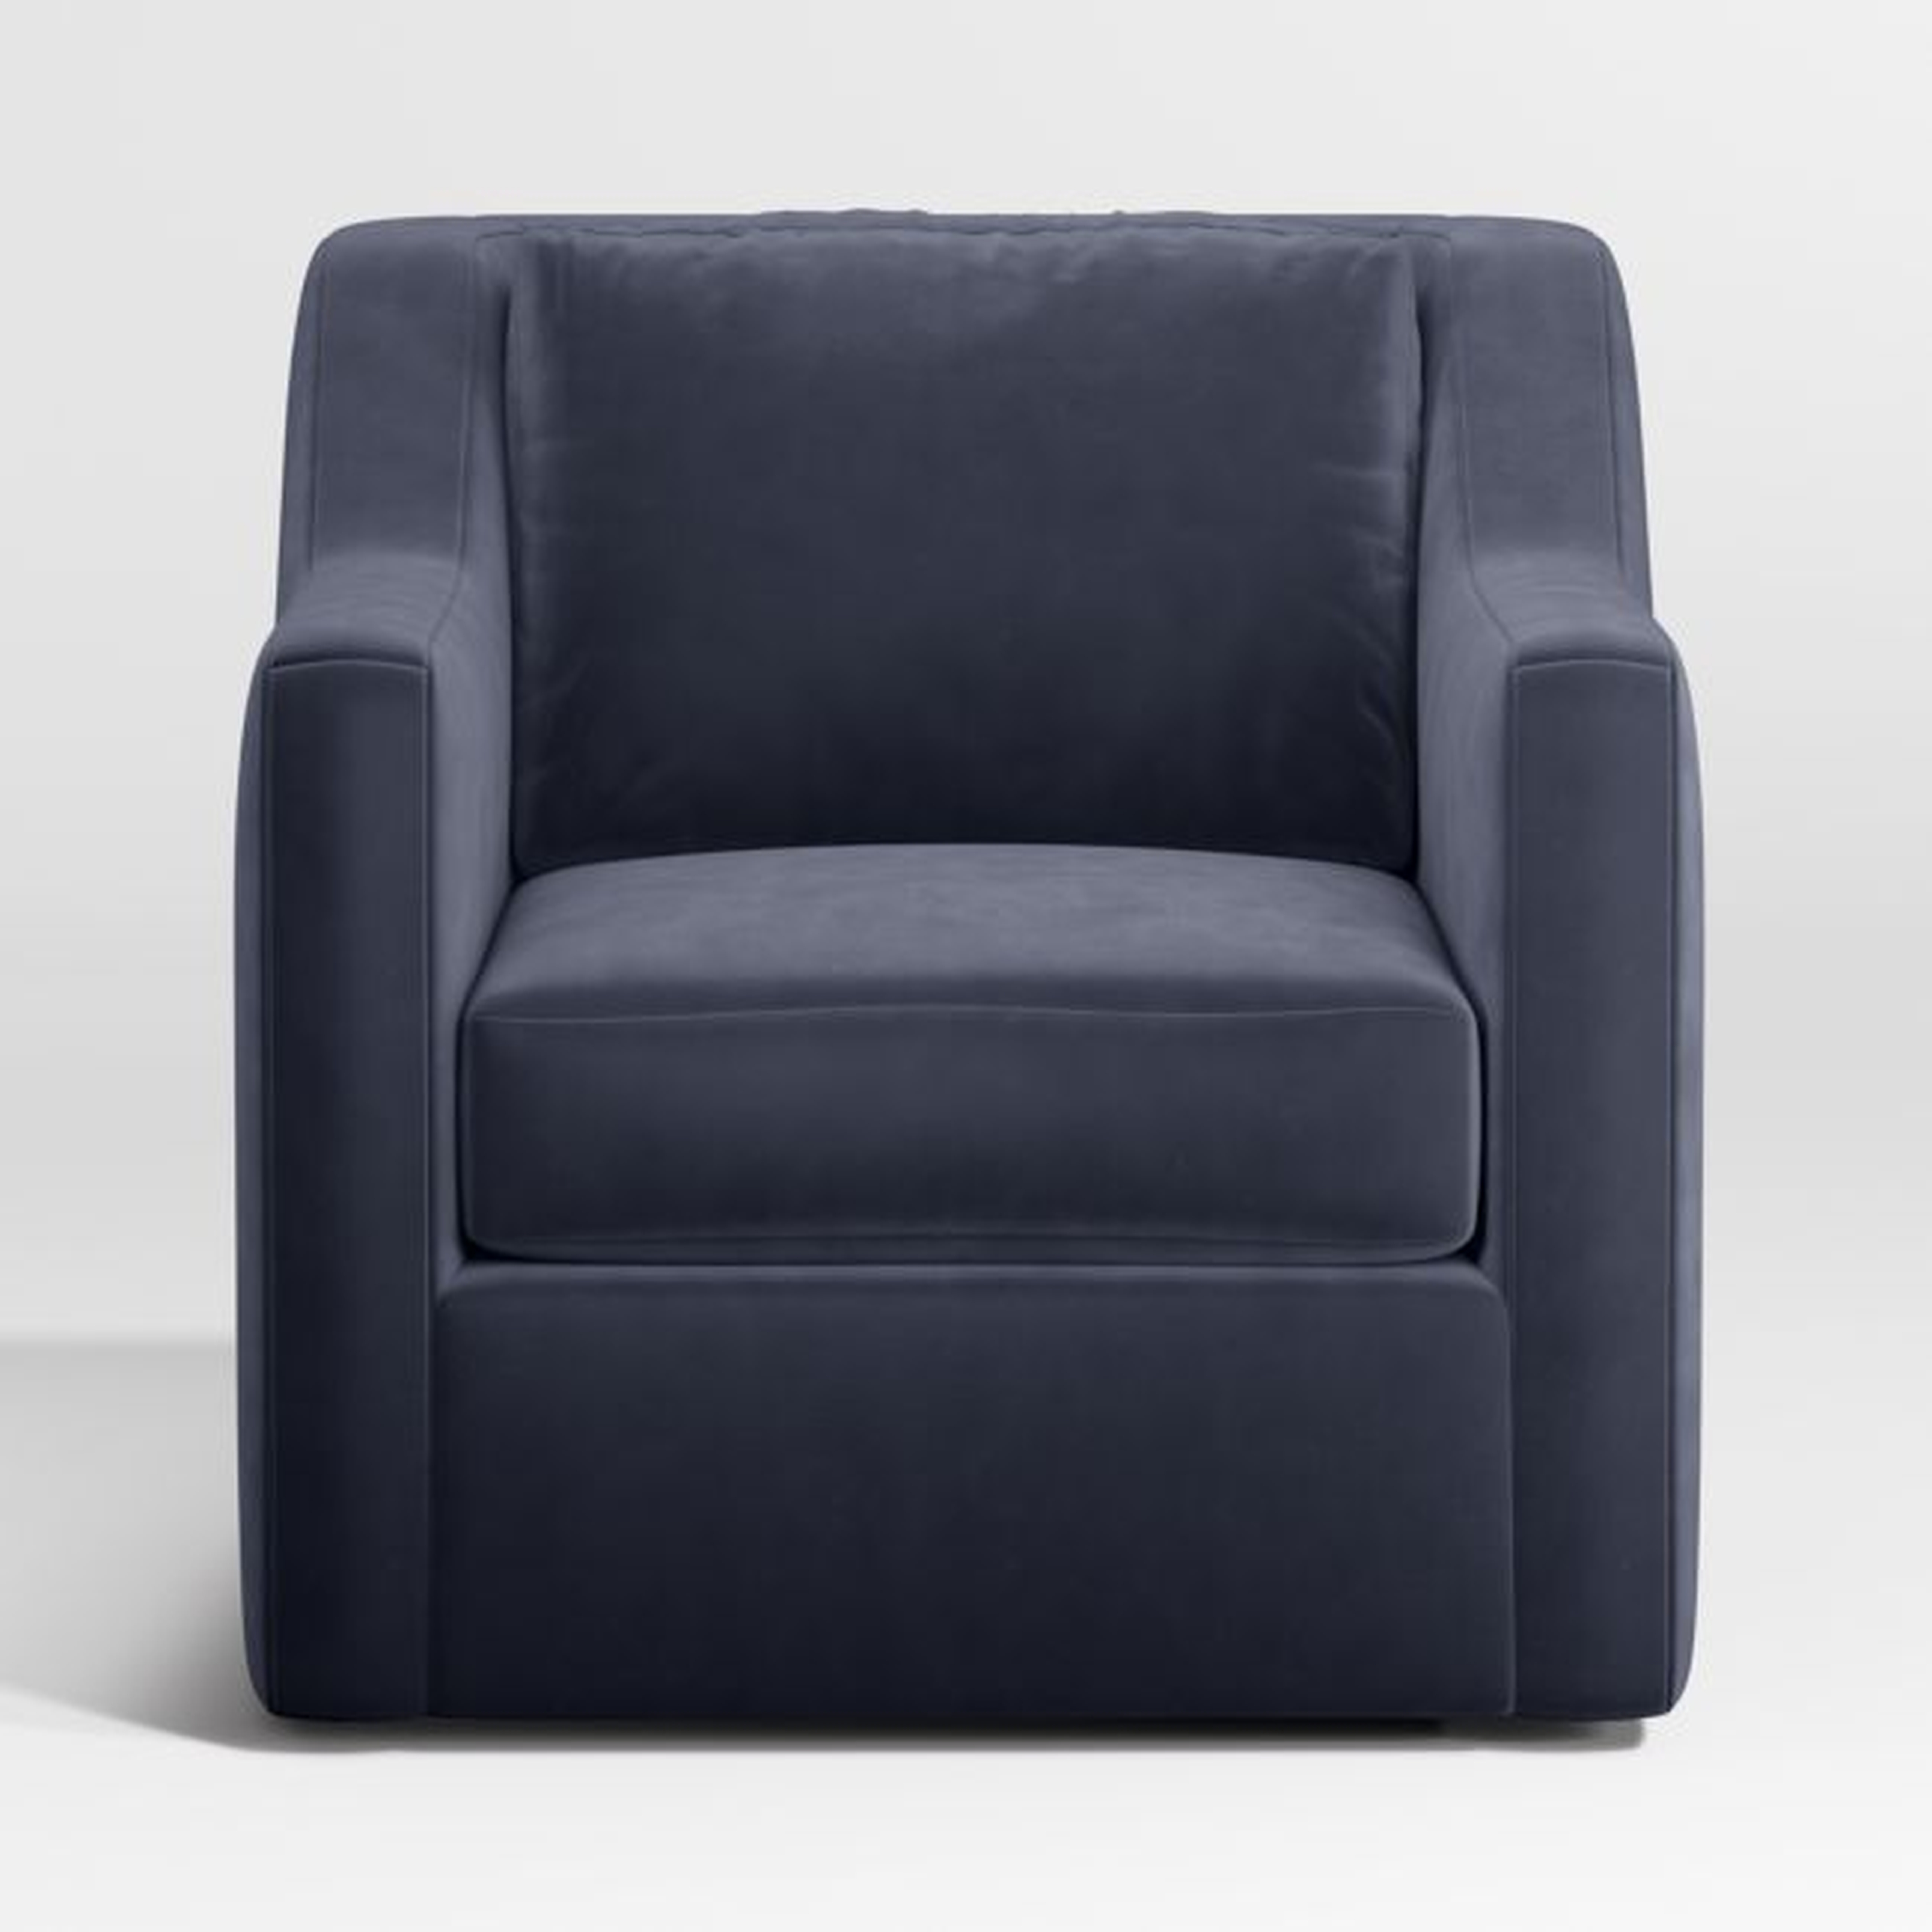 Notch Swivel Chair - Crate and Barrel